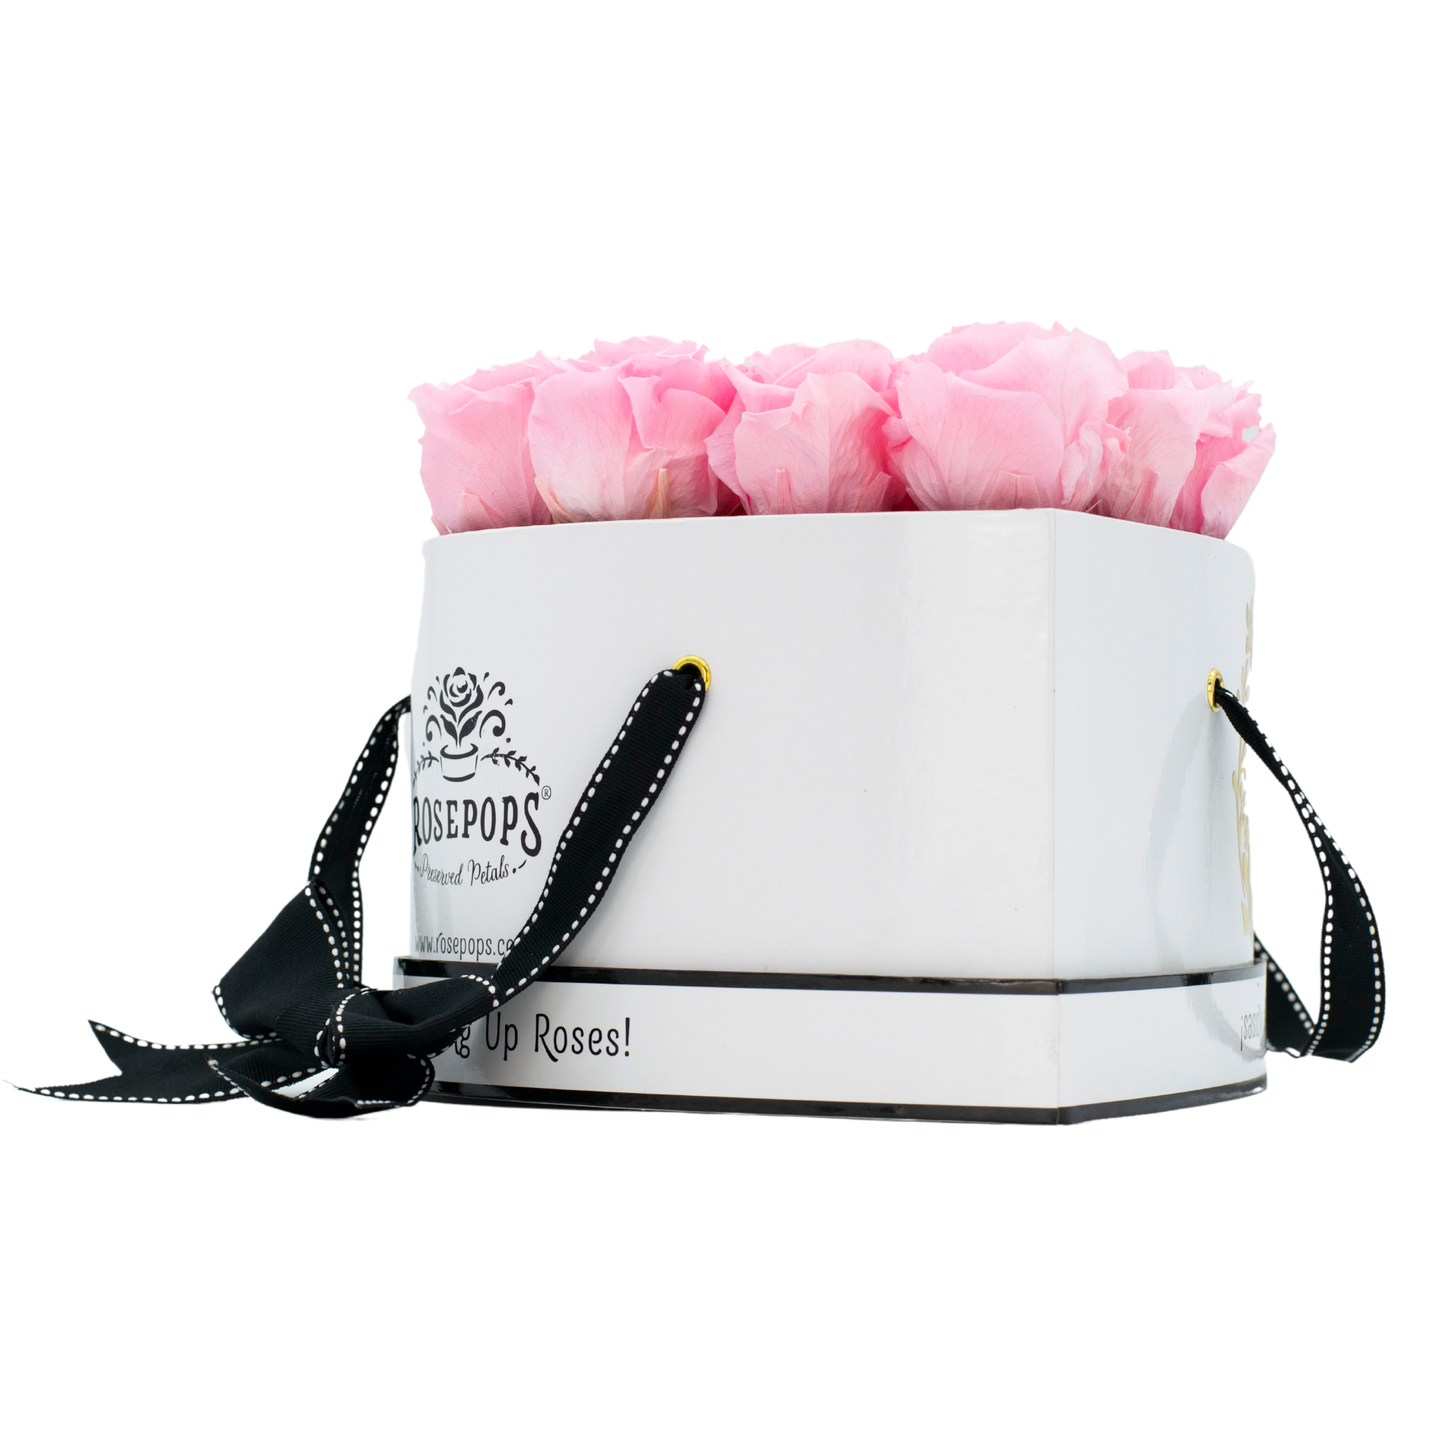 The White Monogrammed Lucky 13 - Cotton Candy Roses